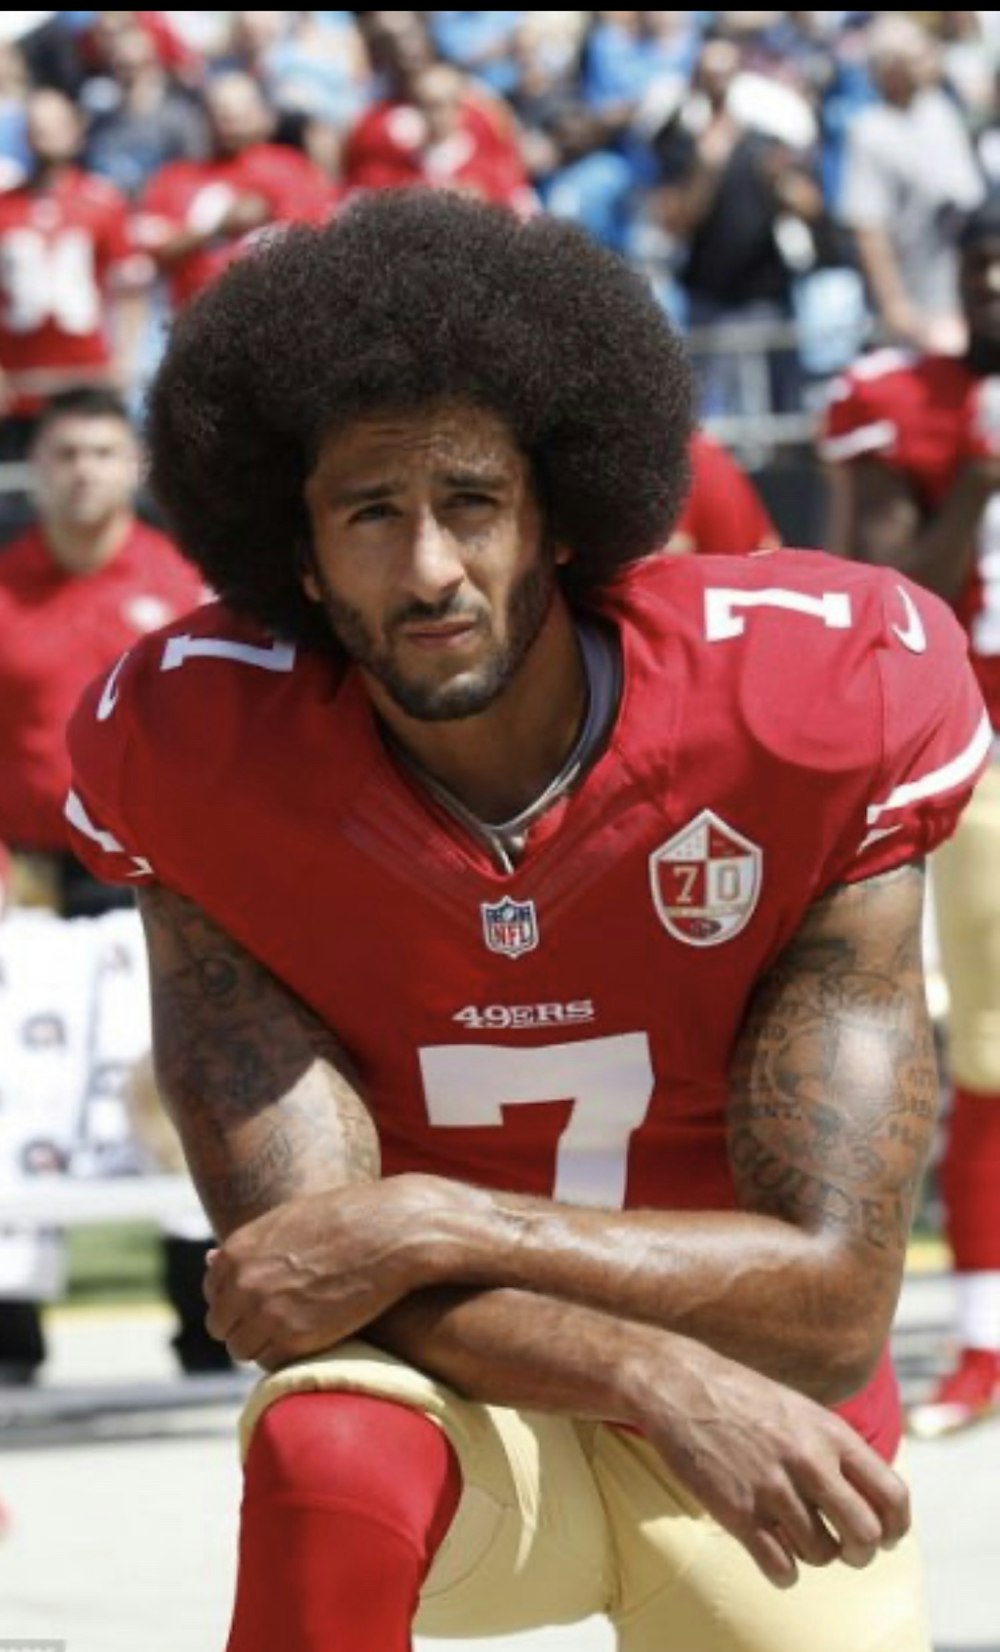 Is it too late for Kap?